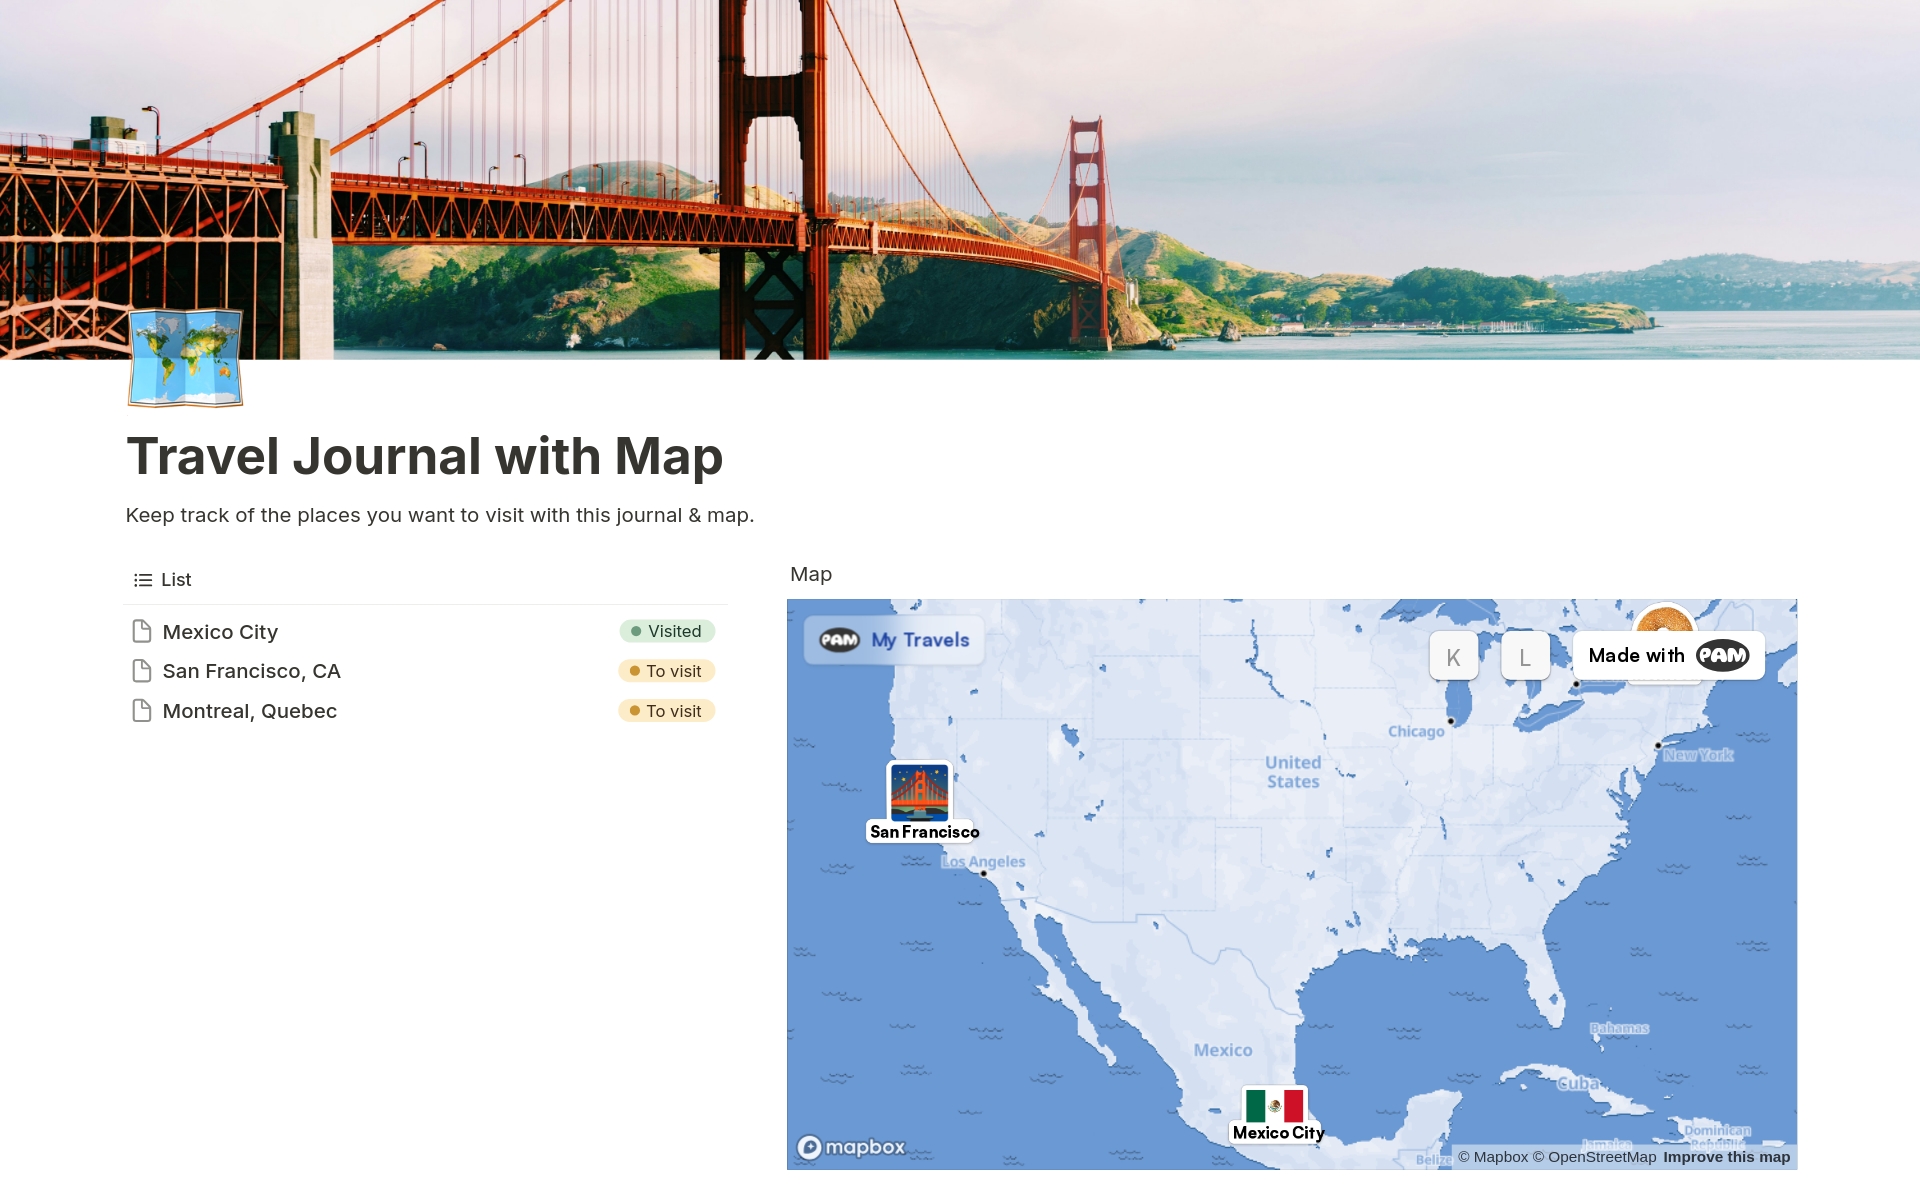 Keep track of places you want to visit & have visited with this simple planner that includes an auto-generated map.